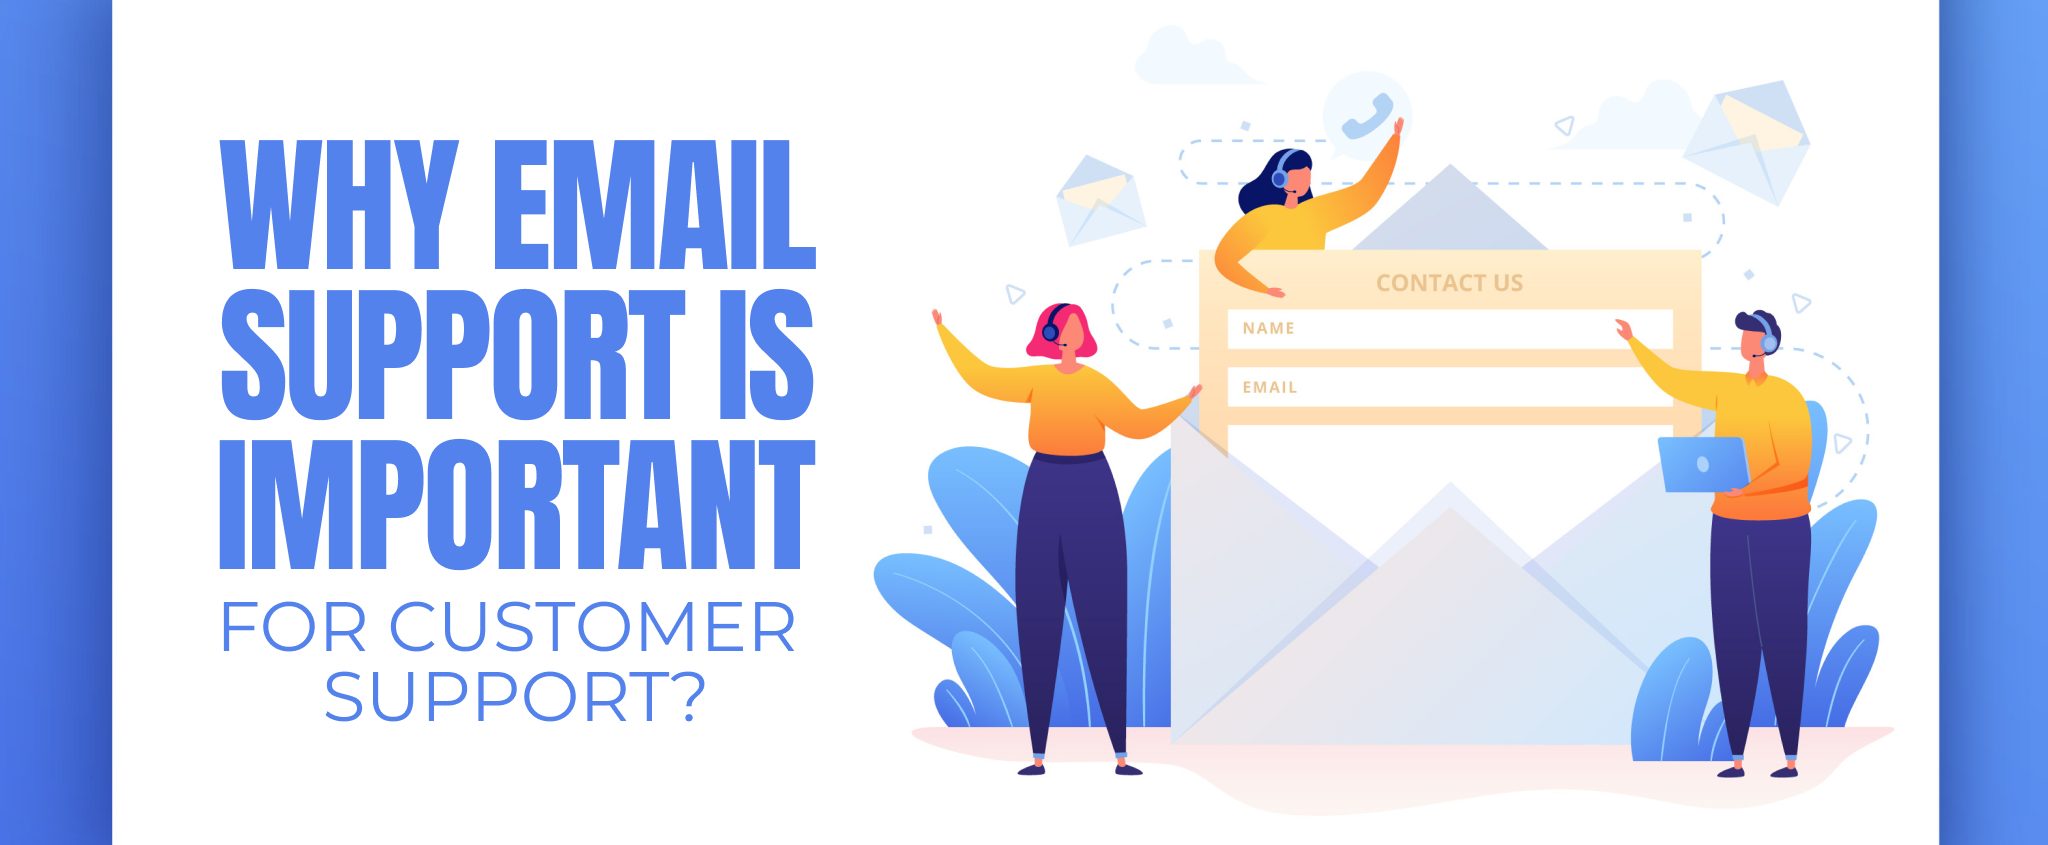 Why Email Support is Important for Customer Support